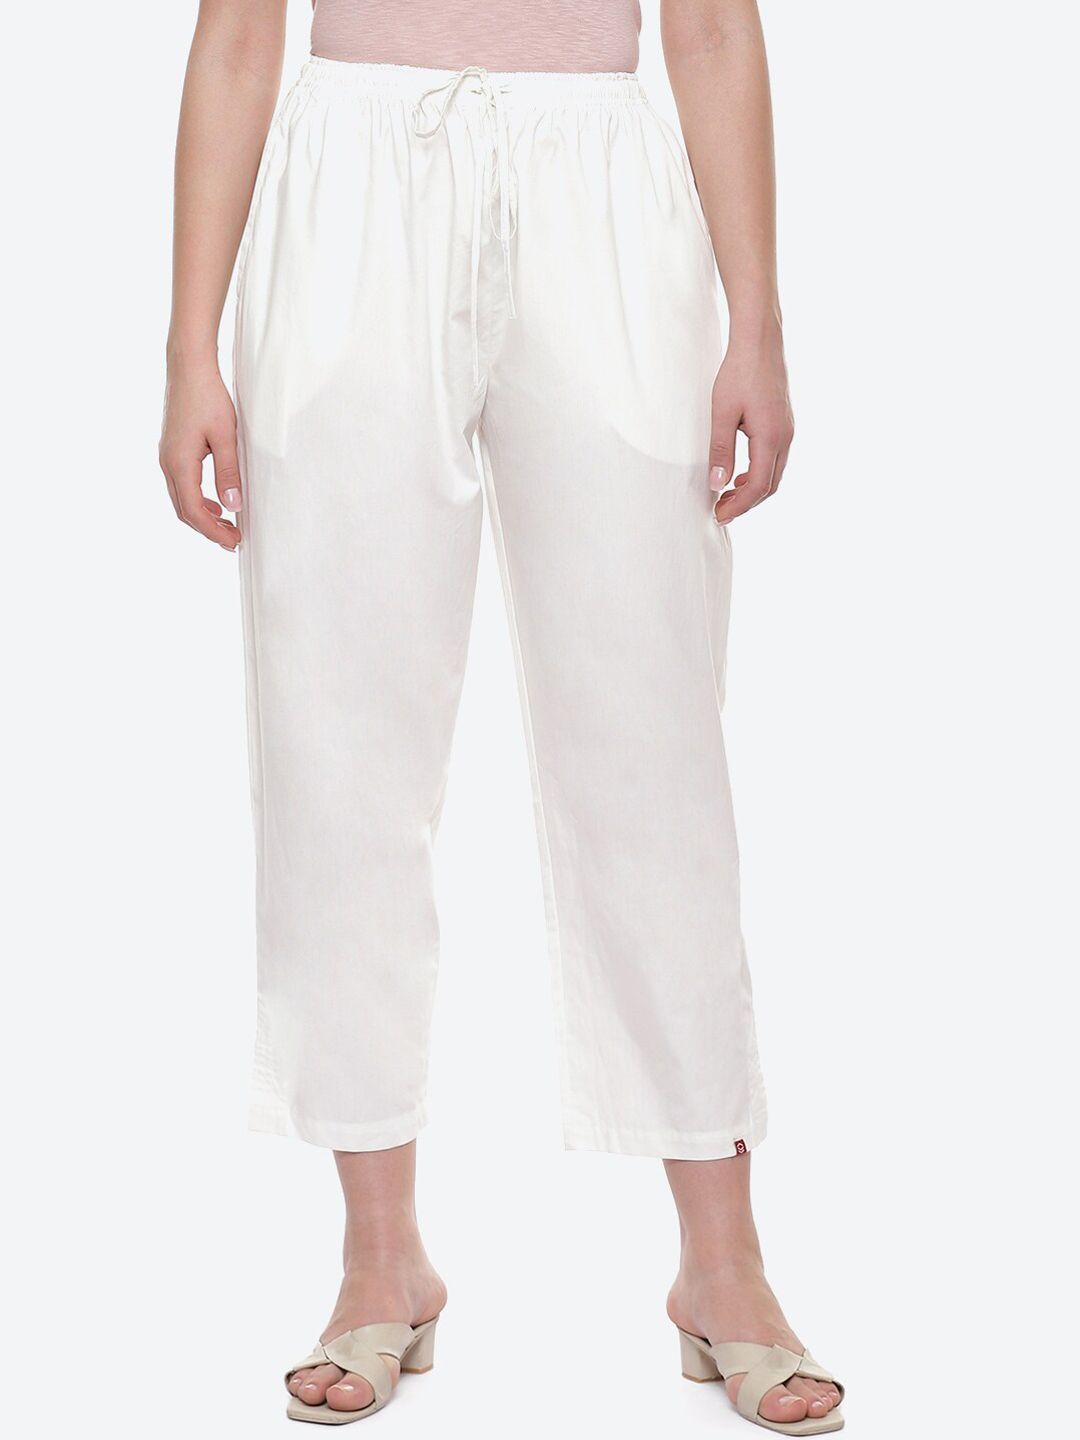 Biba Women Plus Size Off White Straight Fit Cropped Trousers Price in India